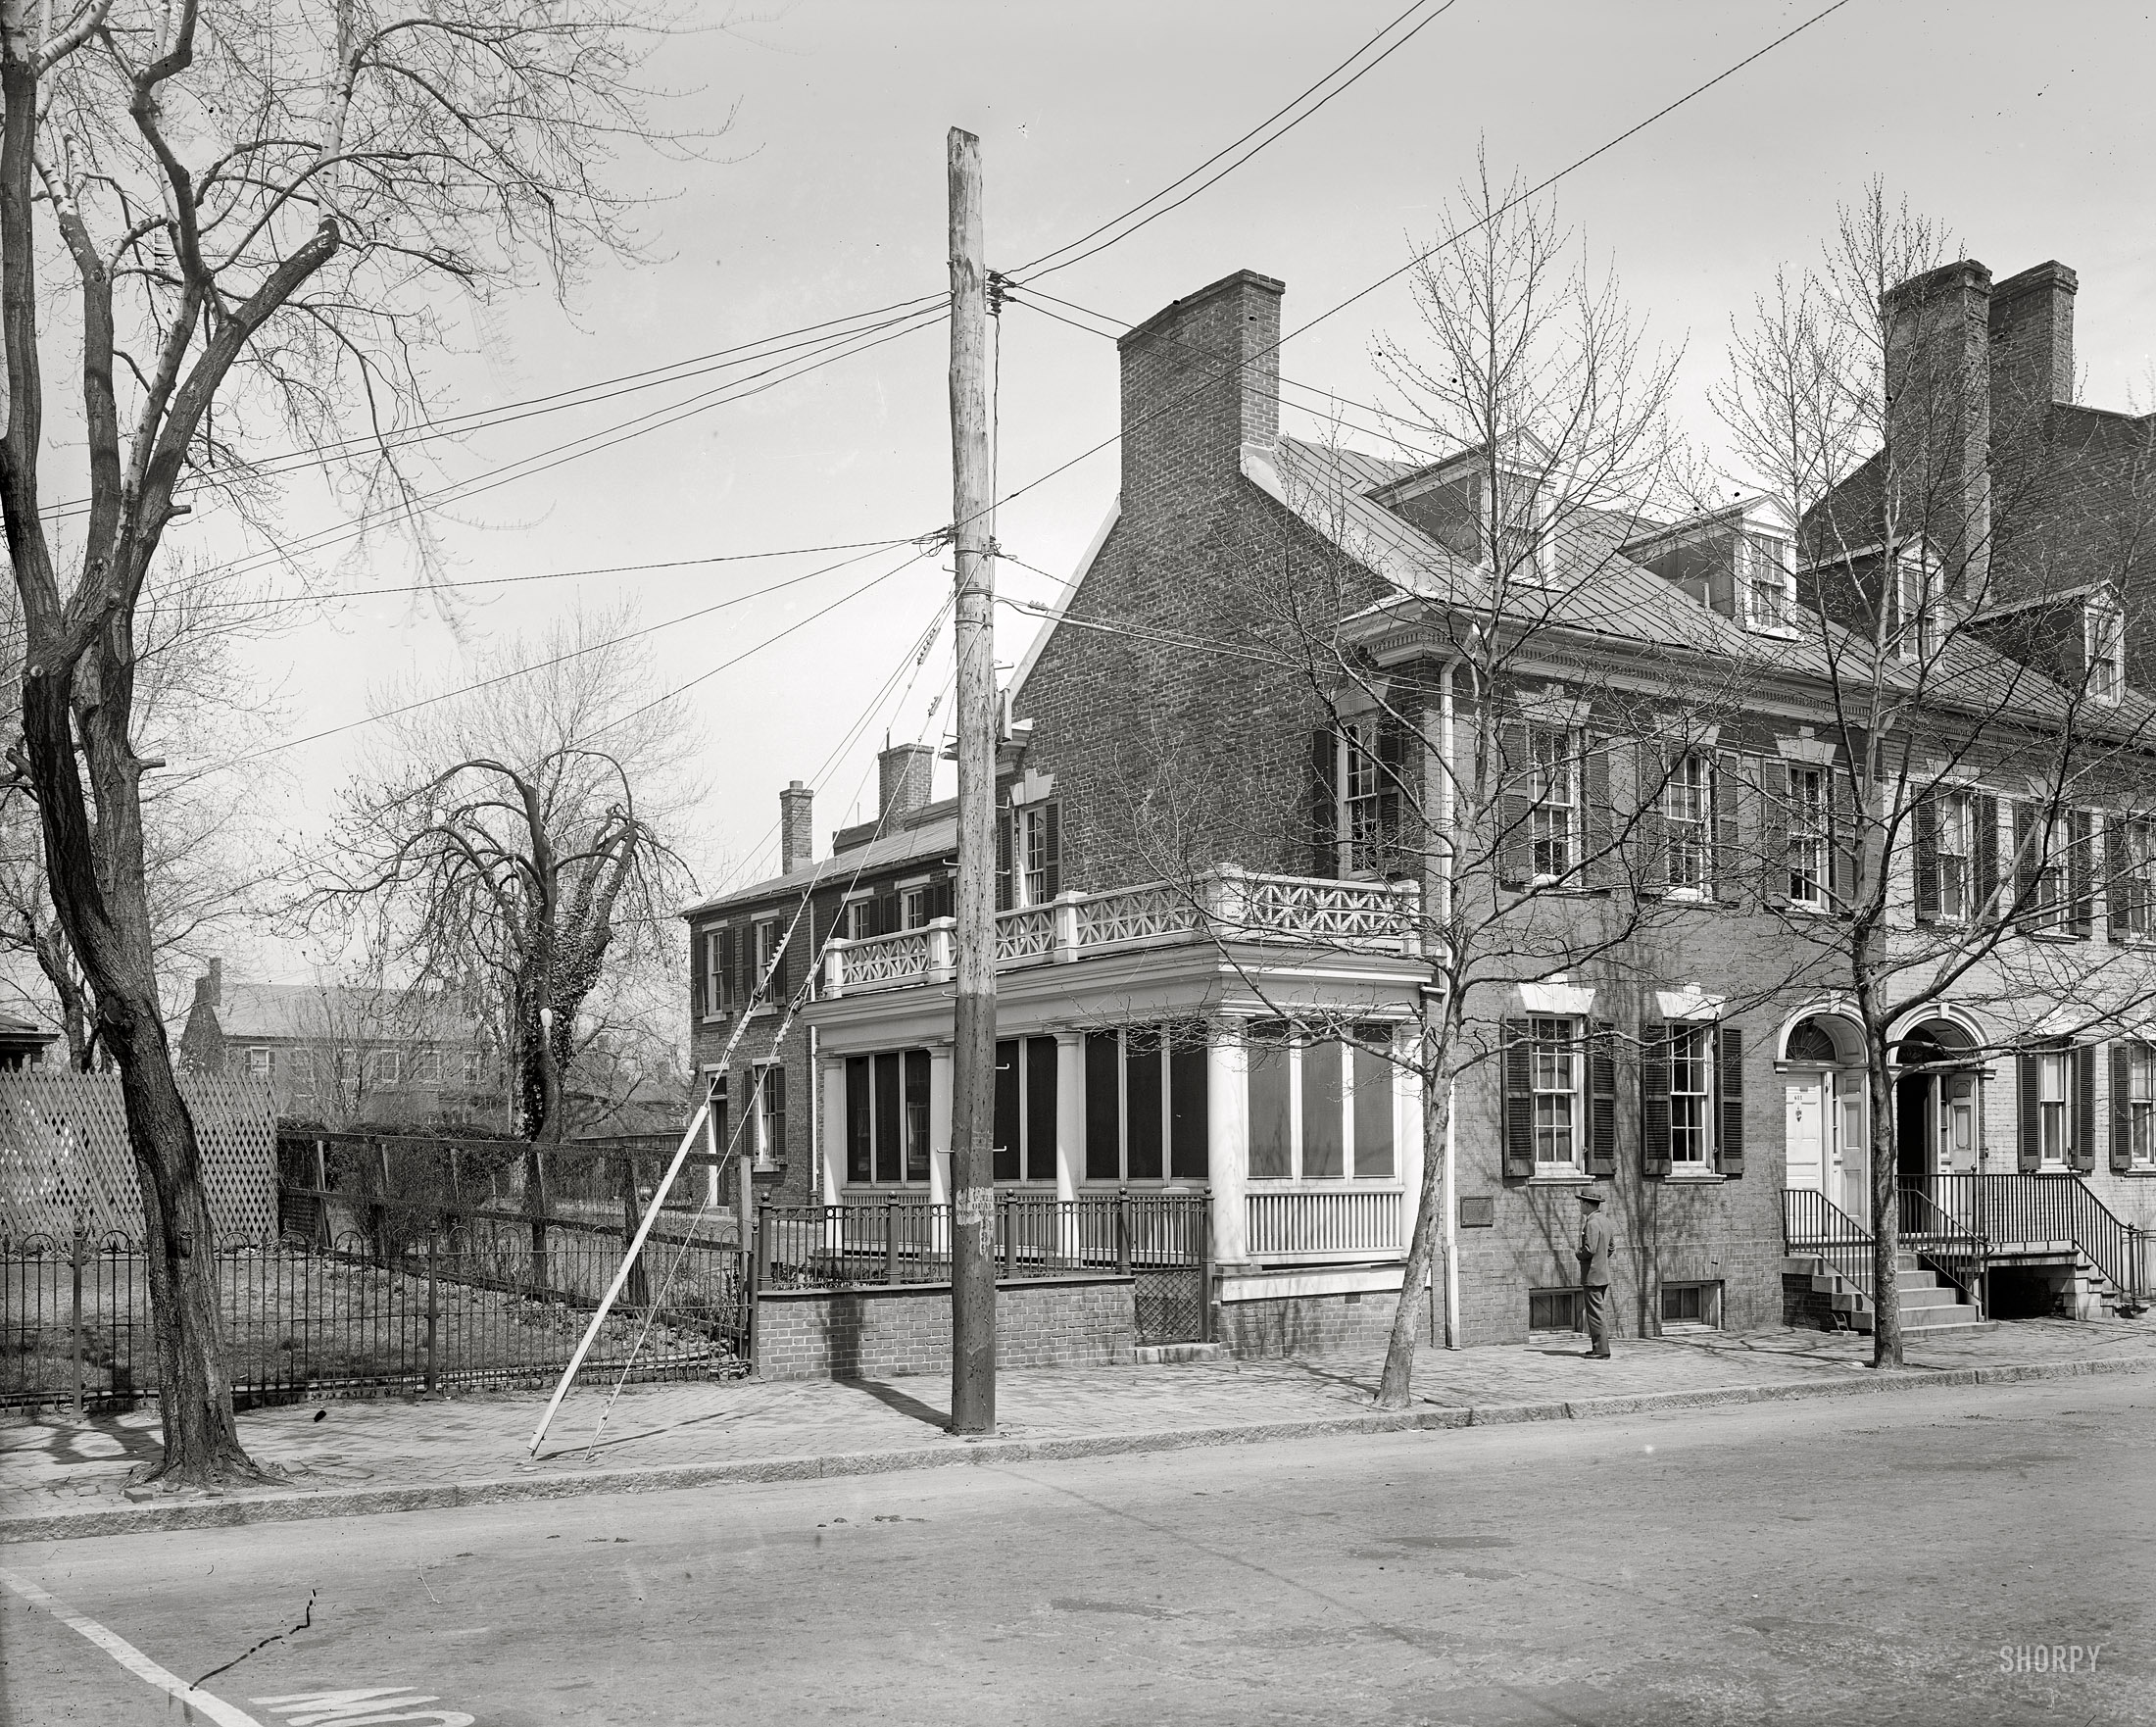 Alexandria, Virginia, circa 1926. "Home of 'Light Horse Harry' Lee (Ford Motor Co.)." National Photo Company Collection glass negative. View full size.